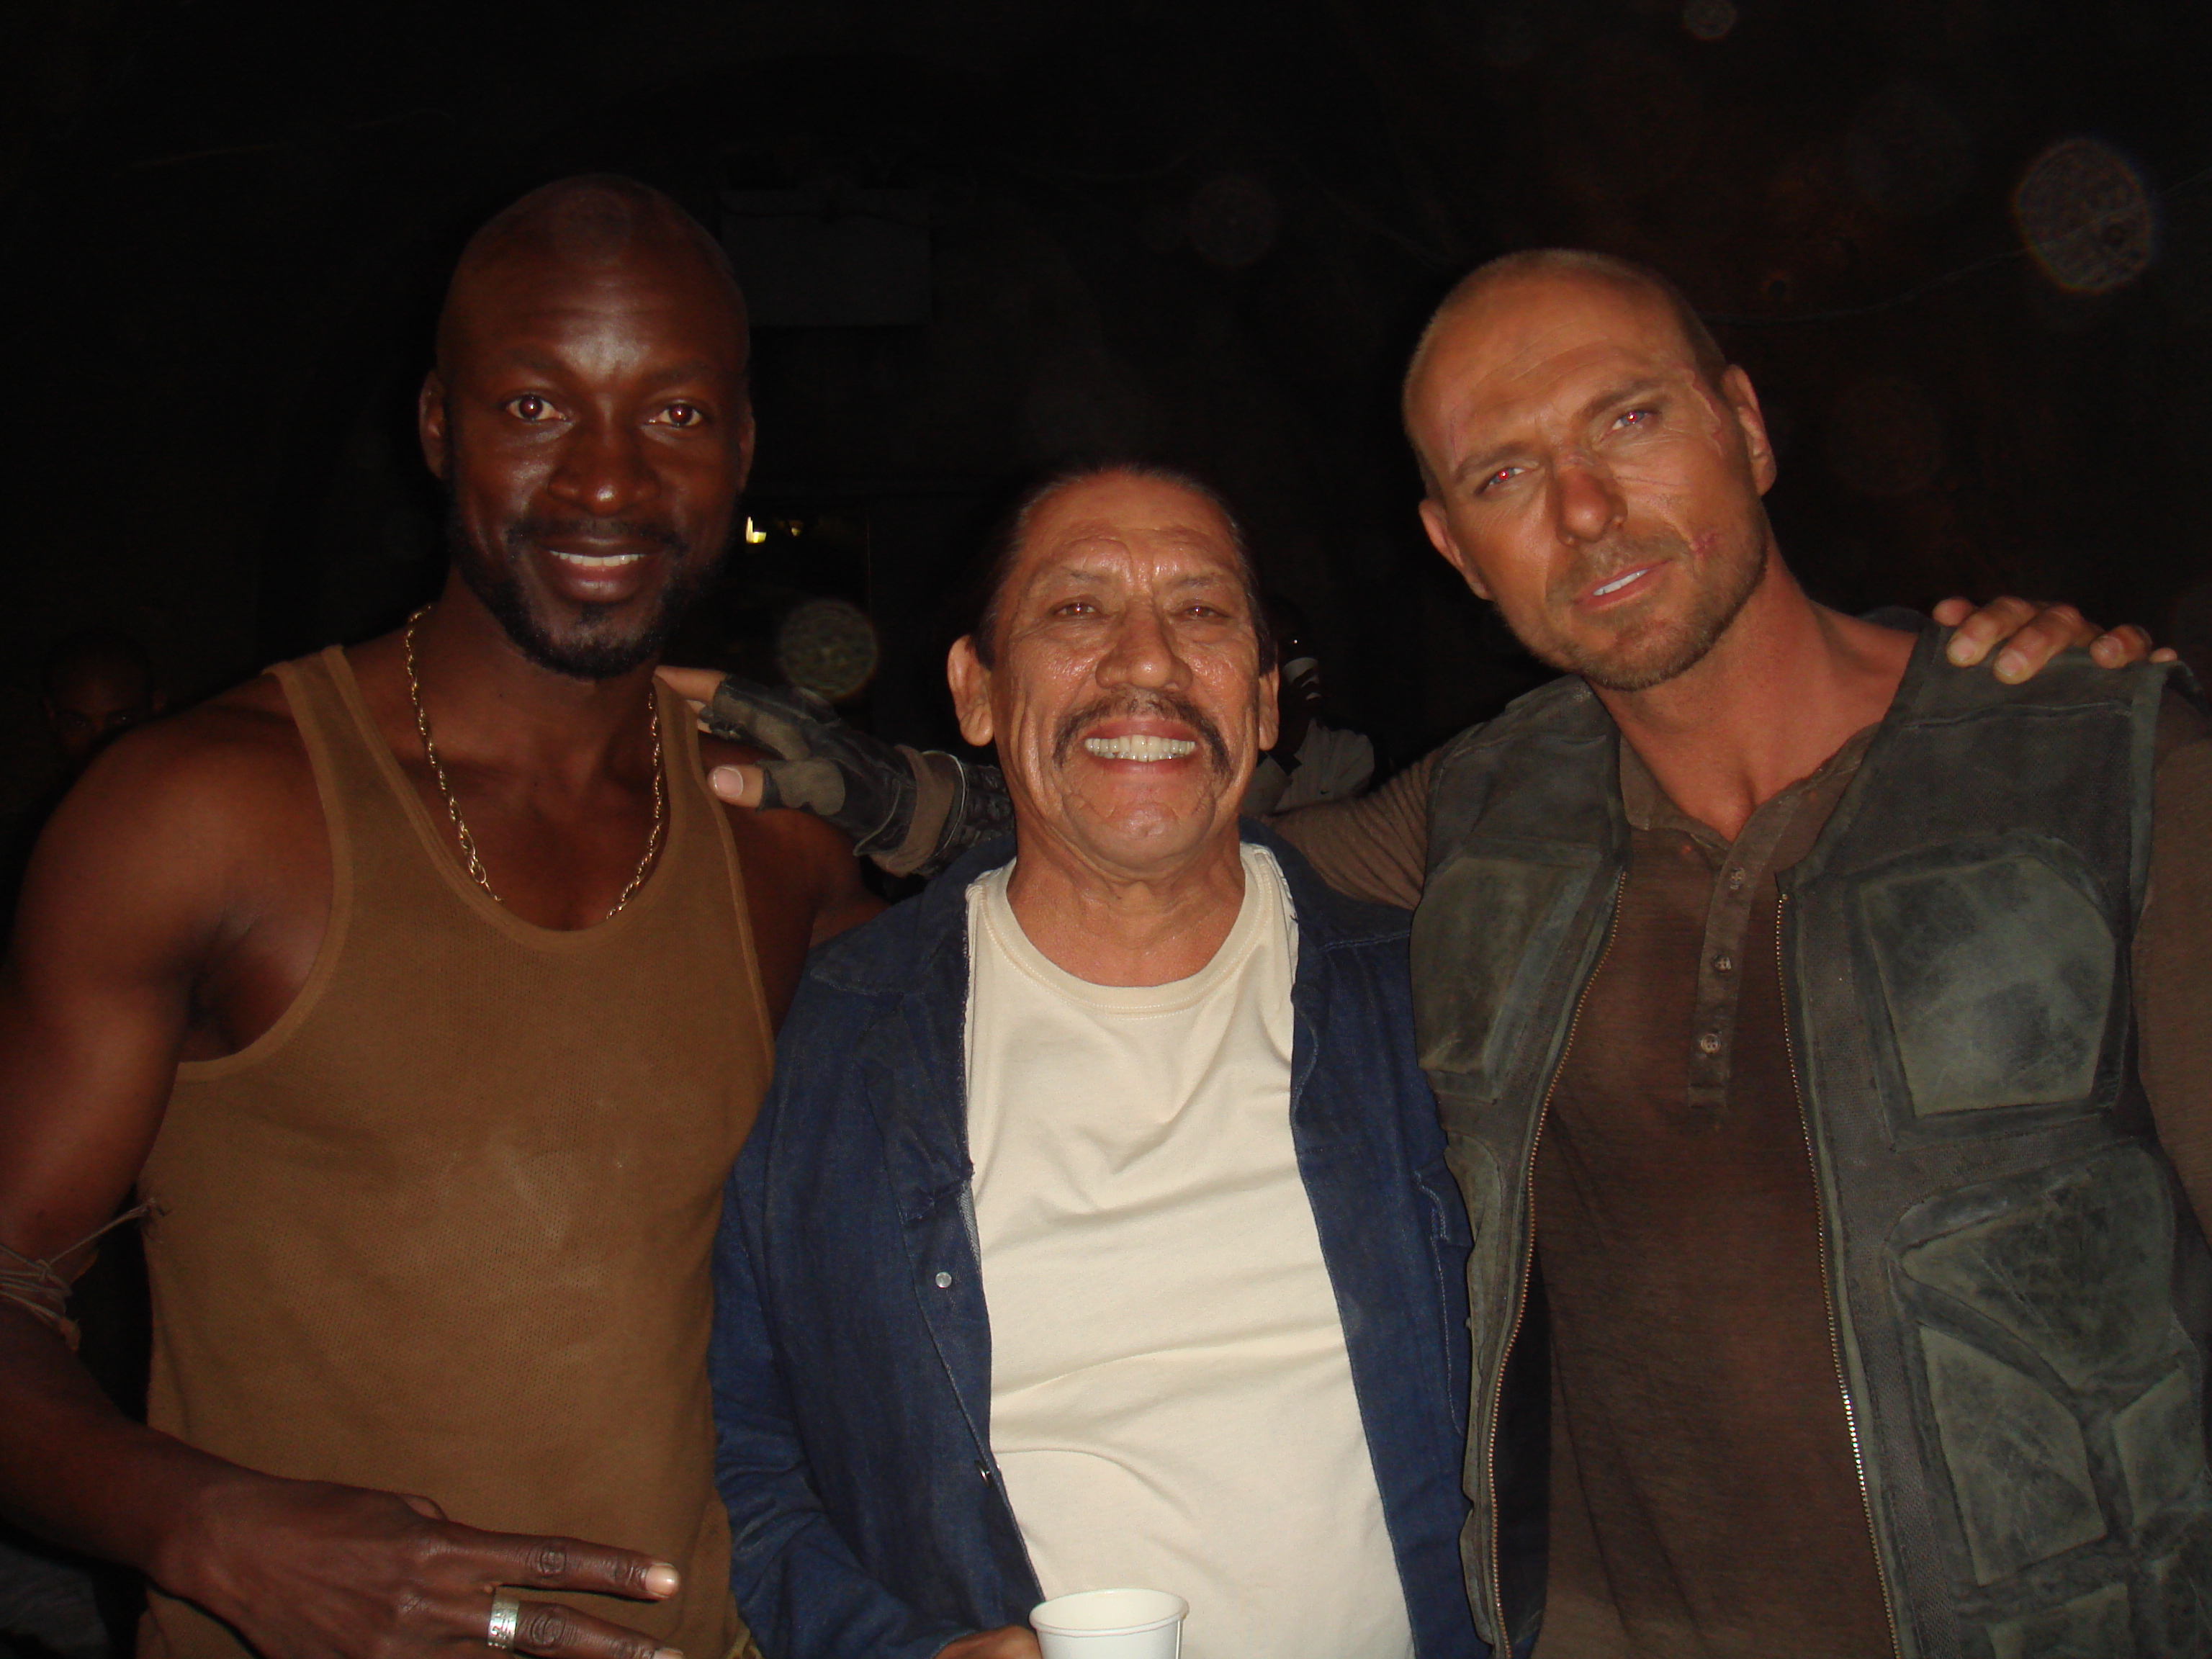 Eugene Khumbanyiwa as Nero with Danny Trejo and Luke Goss on Death Race Inferno' set. Cape Town, South Africa